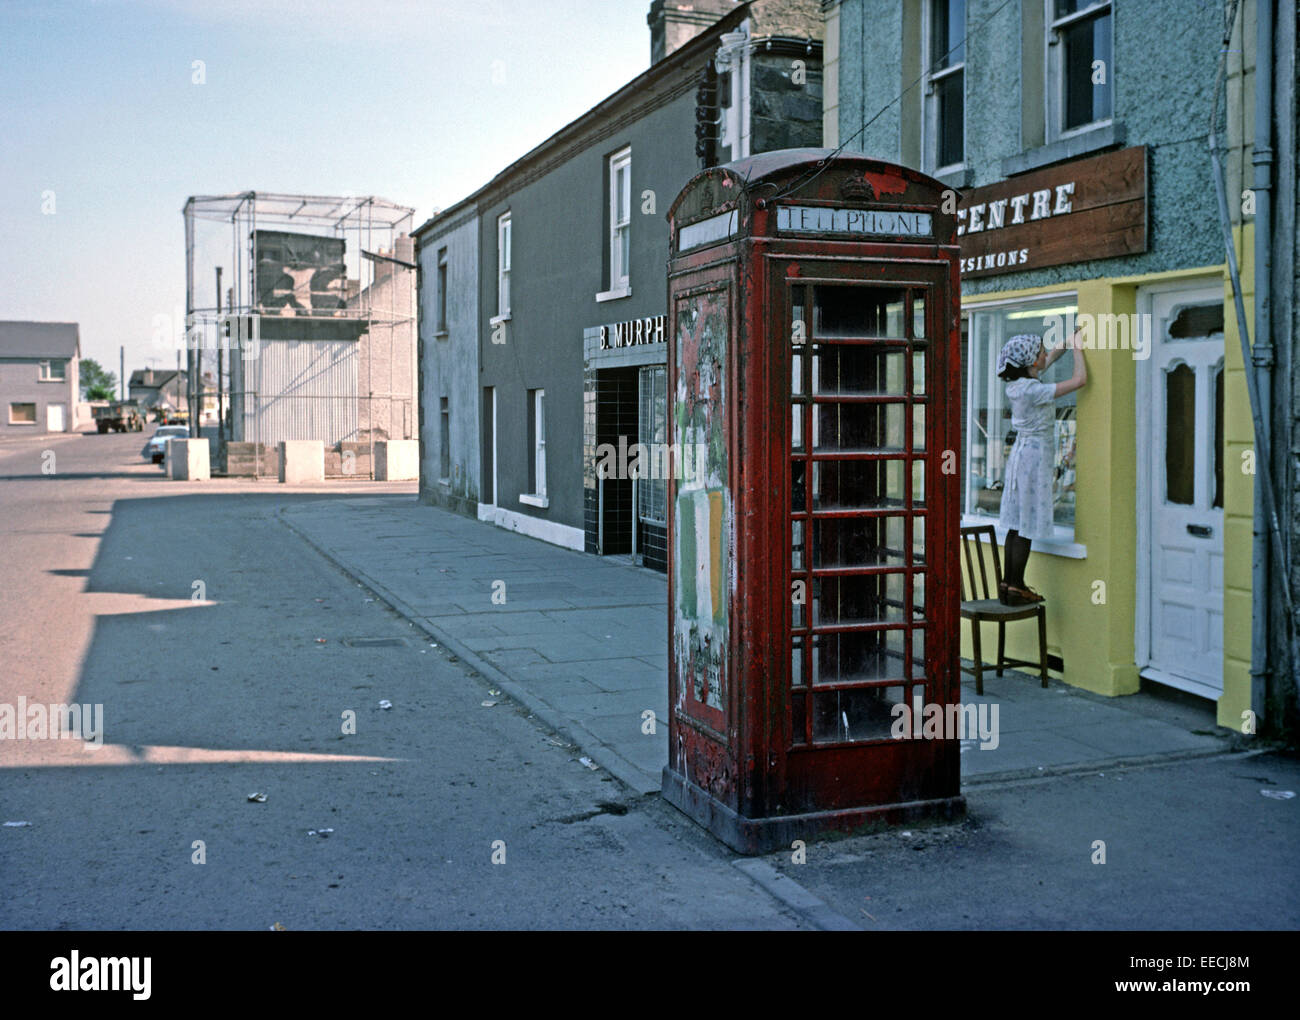 CROSSMAGLEN, NORTHERN IRELAND, JUNE 1977. British Red Telephone Box with the Republic of Ireland Flag painted on in Crossmaglen, South Armagh during The Troubles, Northern Ireland. Stock Photo